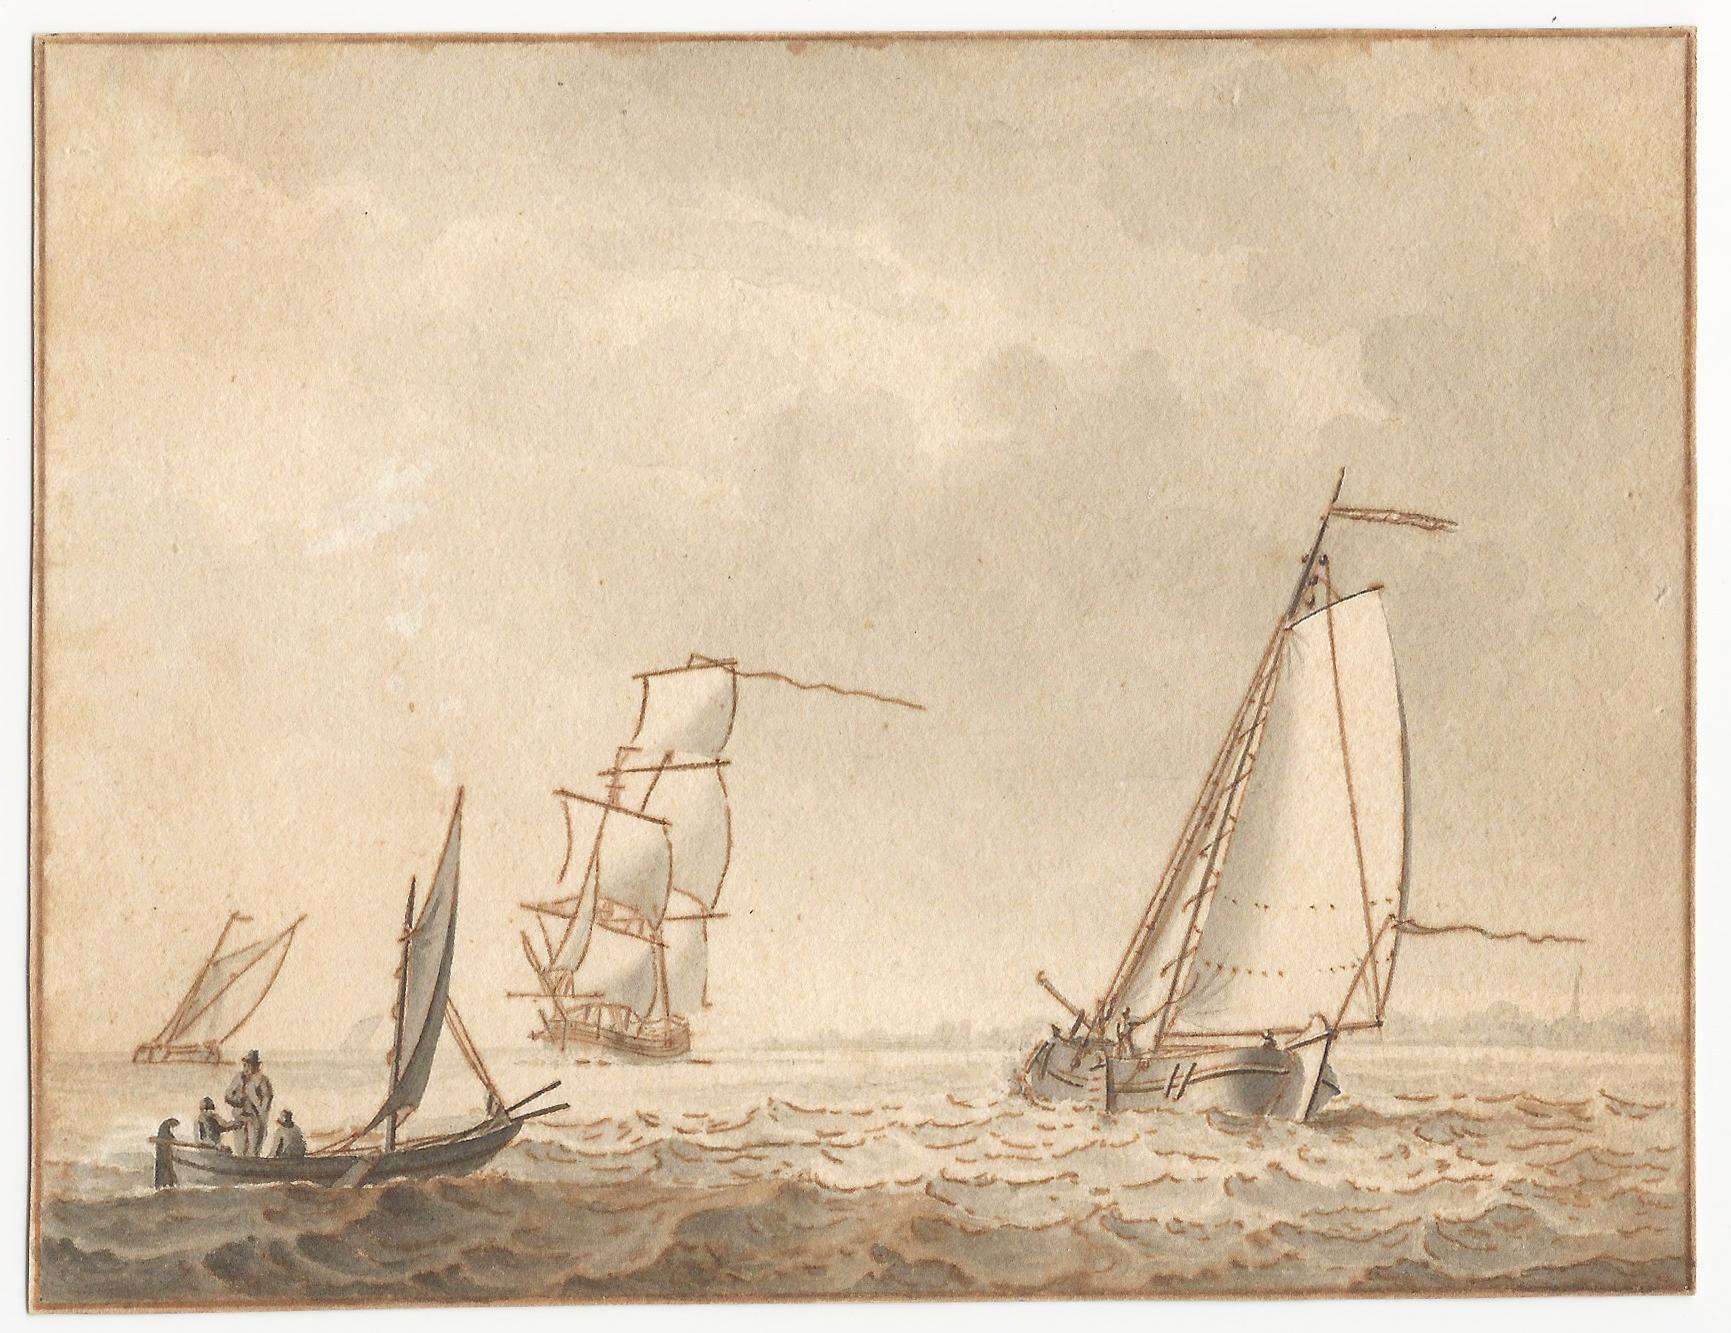 Cornelis Thim (Rotterdam 1754 – 1813 Utrecht)

Vessels in a Breeze before a Coast

Pen and brown ink, grey wash, brown ink framing lines, 108 x 141 mm (4.3 x 5.6 inch)

Signed and dated ‘Korn: Thim fec: 1792’ (pen and brown ink,